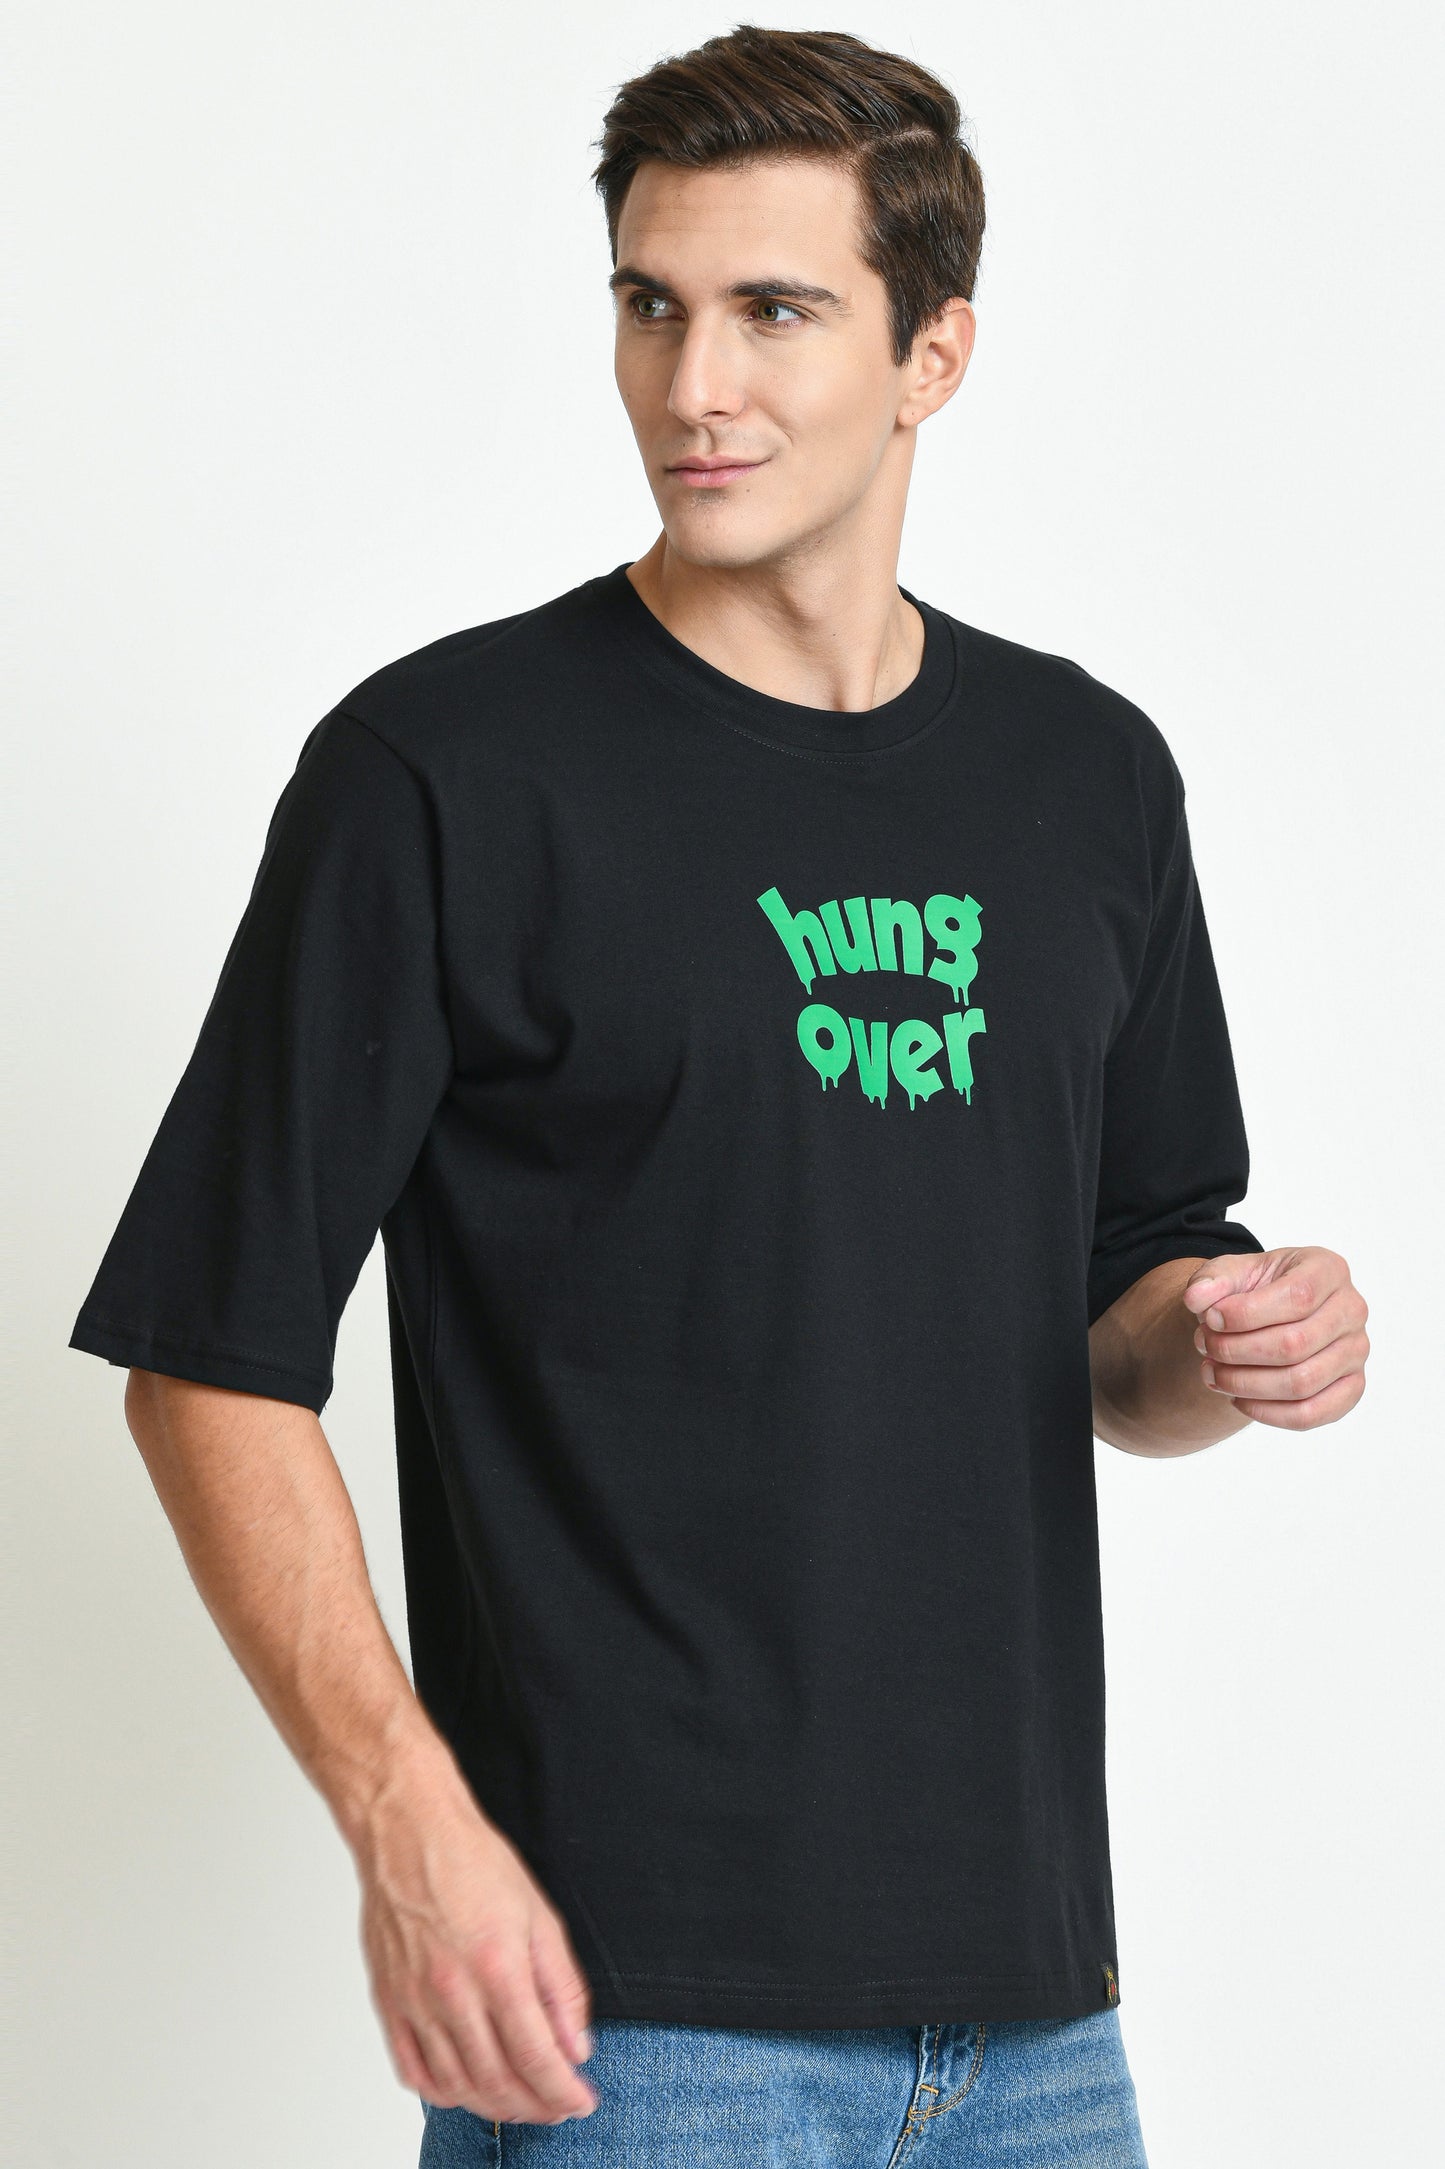 HUNG OVER PRINTED OVERSIZED T-SHIRT